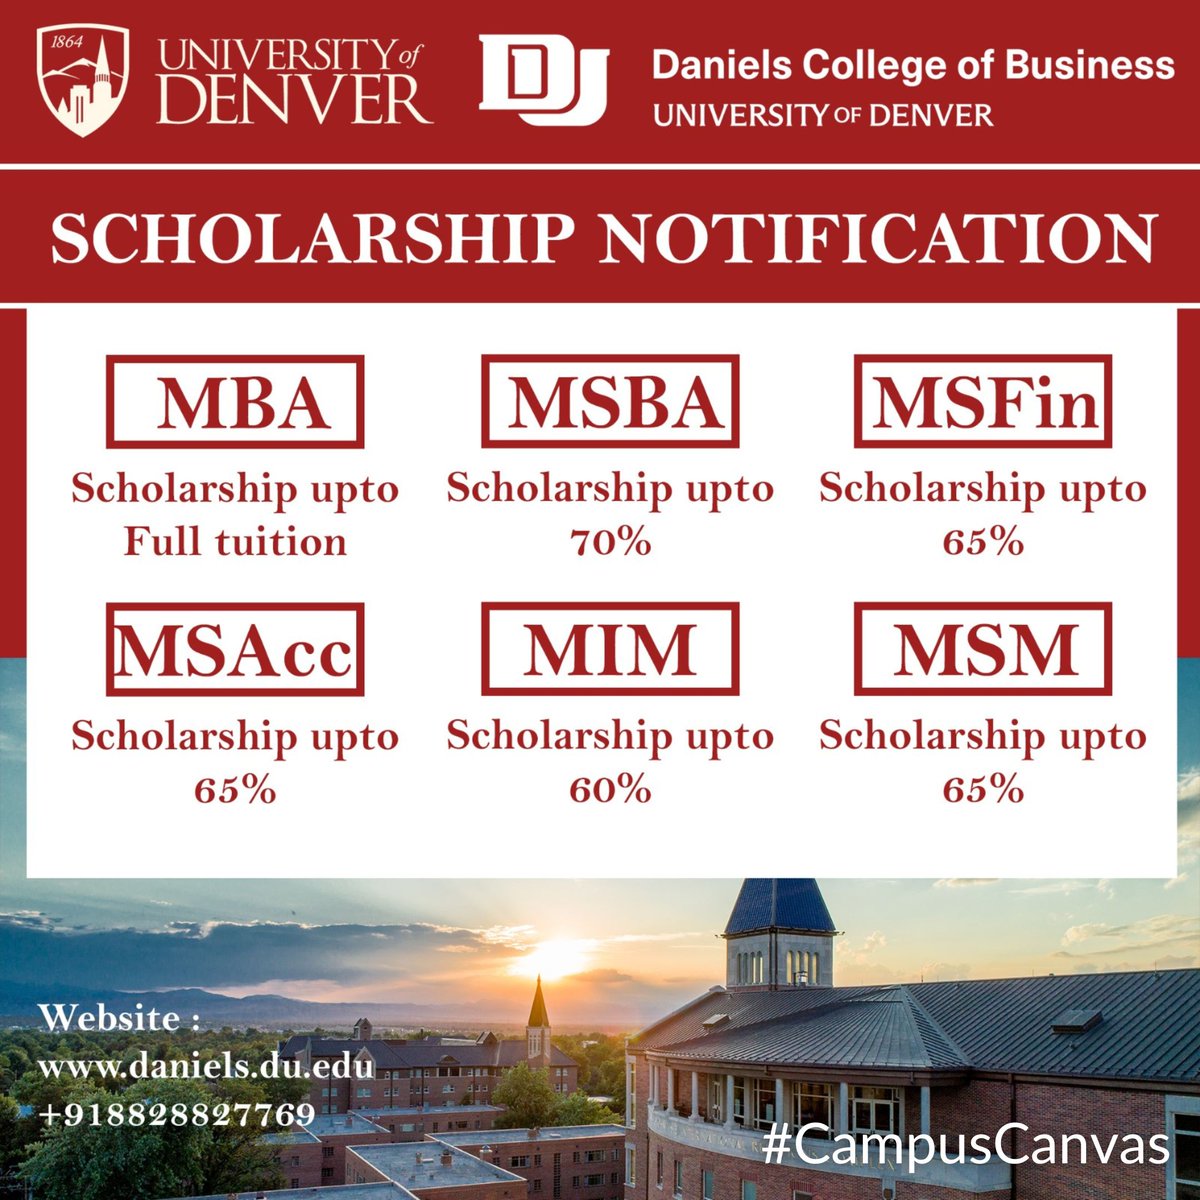 The University of Denver is a private research university in Denver, Colorado. Classified among 'R1: Doctoral Universities, Daniels College of Business offers STEM-designated Masters in Finance, Accounting, Business Analytics, Marketing, Management, MBA etc. #CampusCanvas